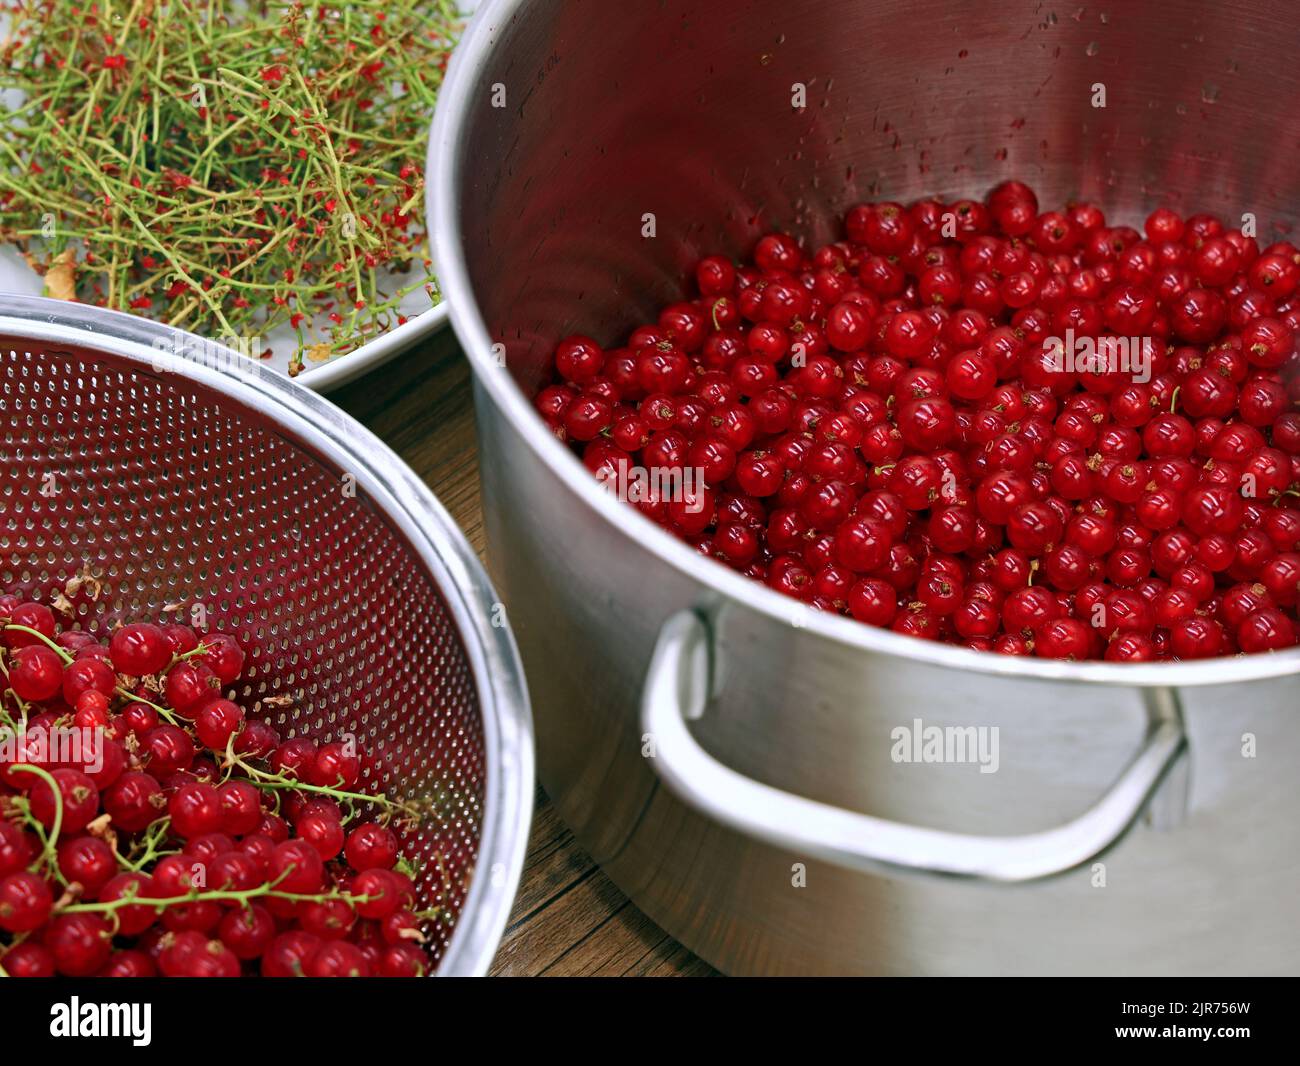 cleaned red currant berries in a saucepan for making fruit juice or jam, removing the stalk of the berries Stock Photo